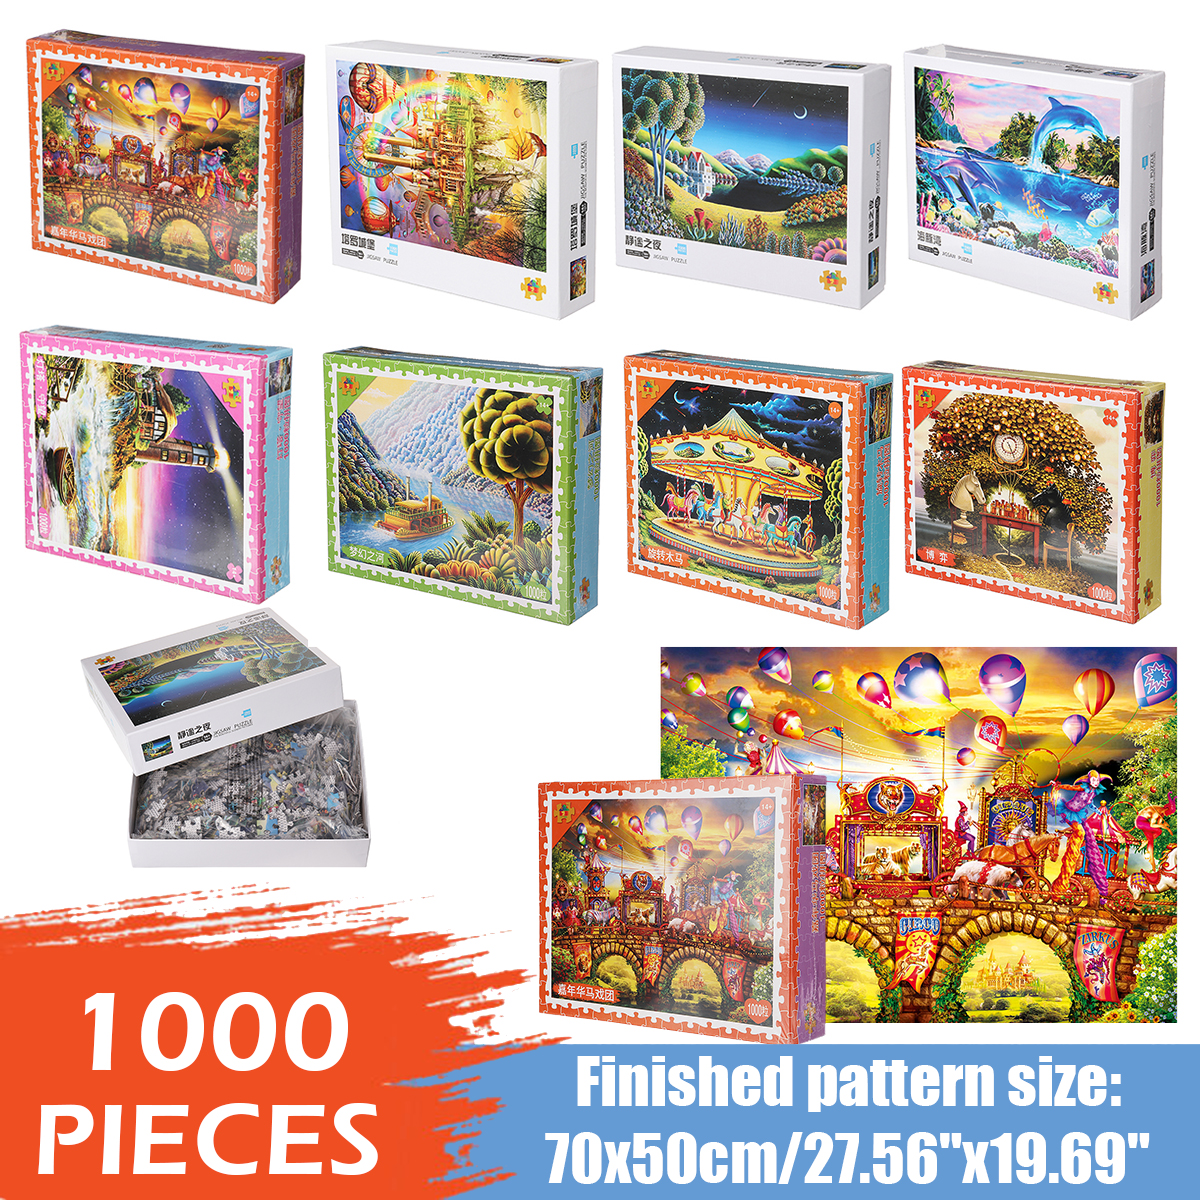 1000 Pieces Jigsaw Puzzle Toy For Adults Children Kids Games Educational Toys